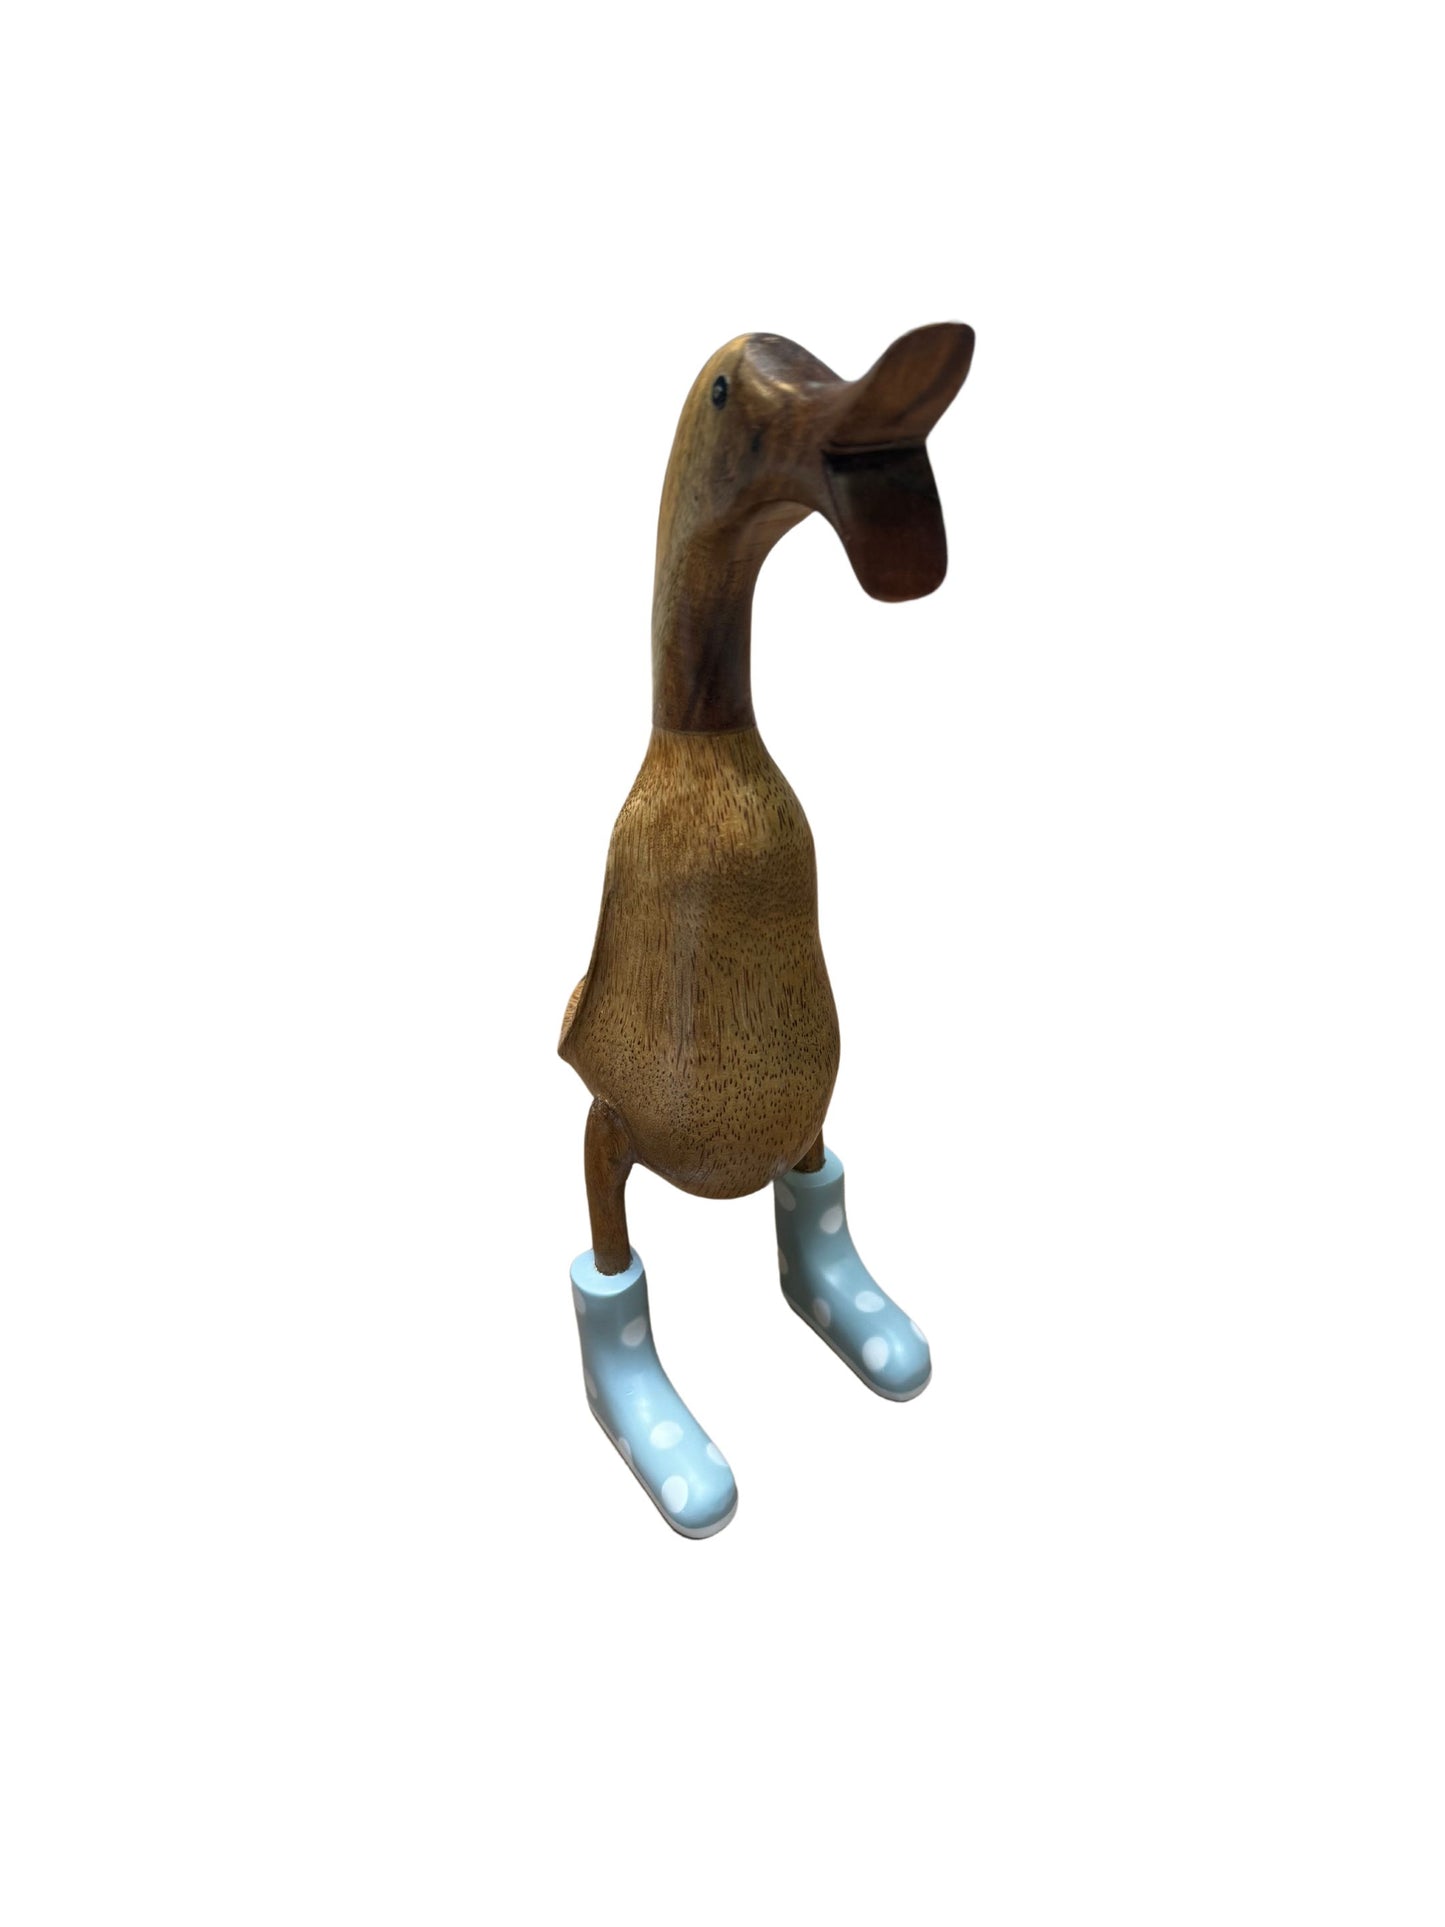 Eclectic Home Accent Duck in Boots Small Wooden  Decor Furniture